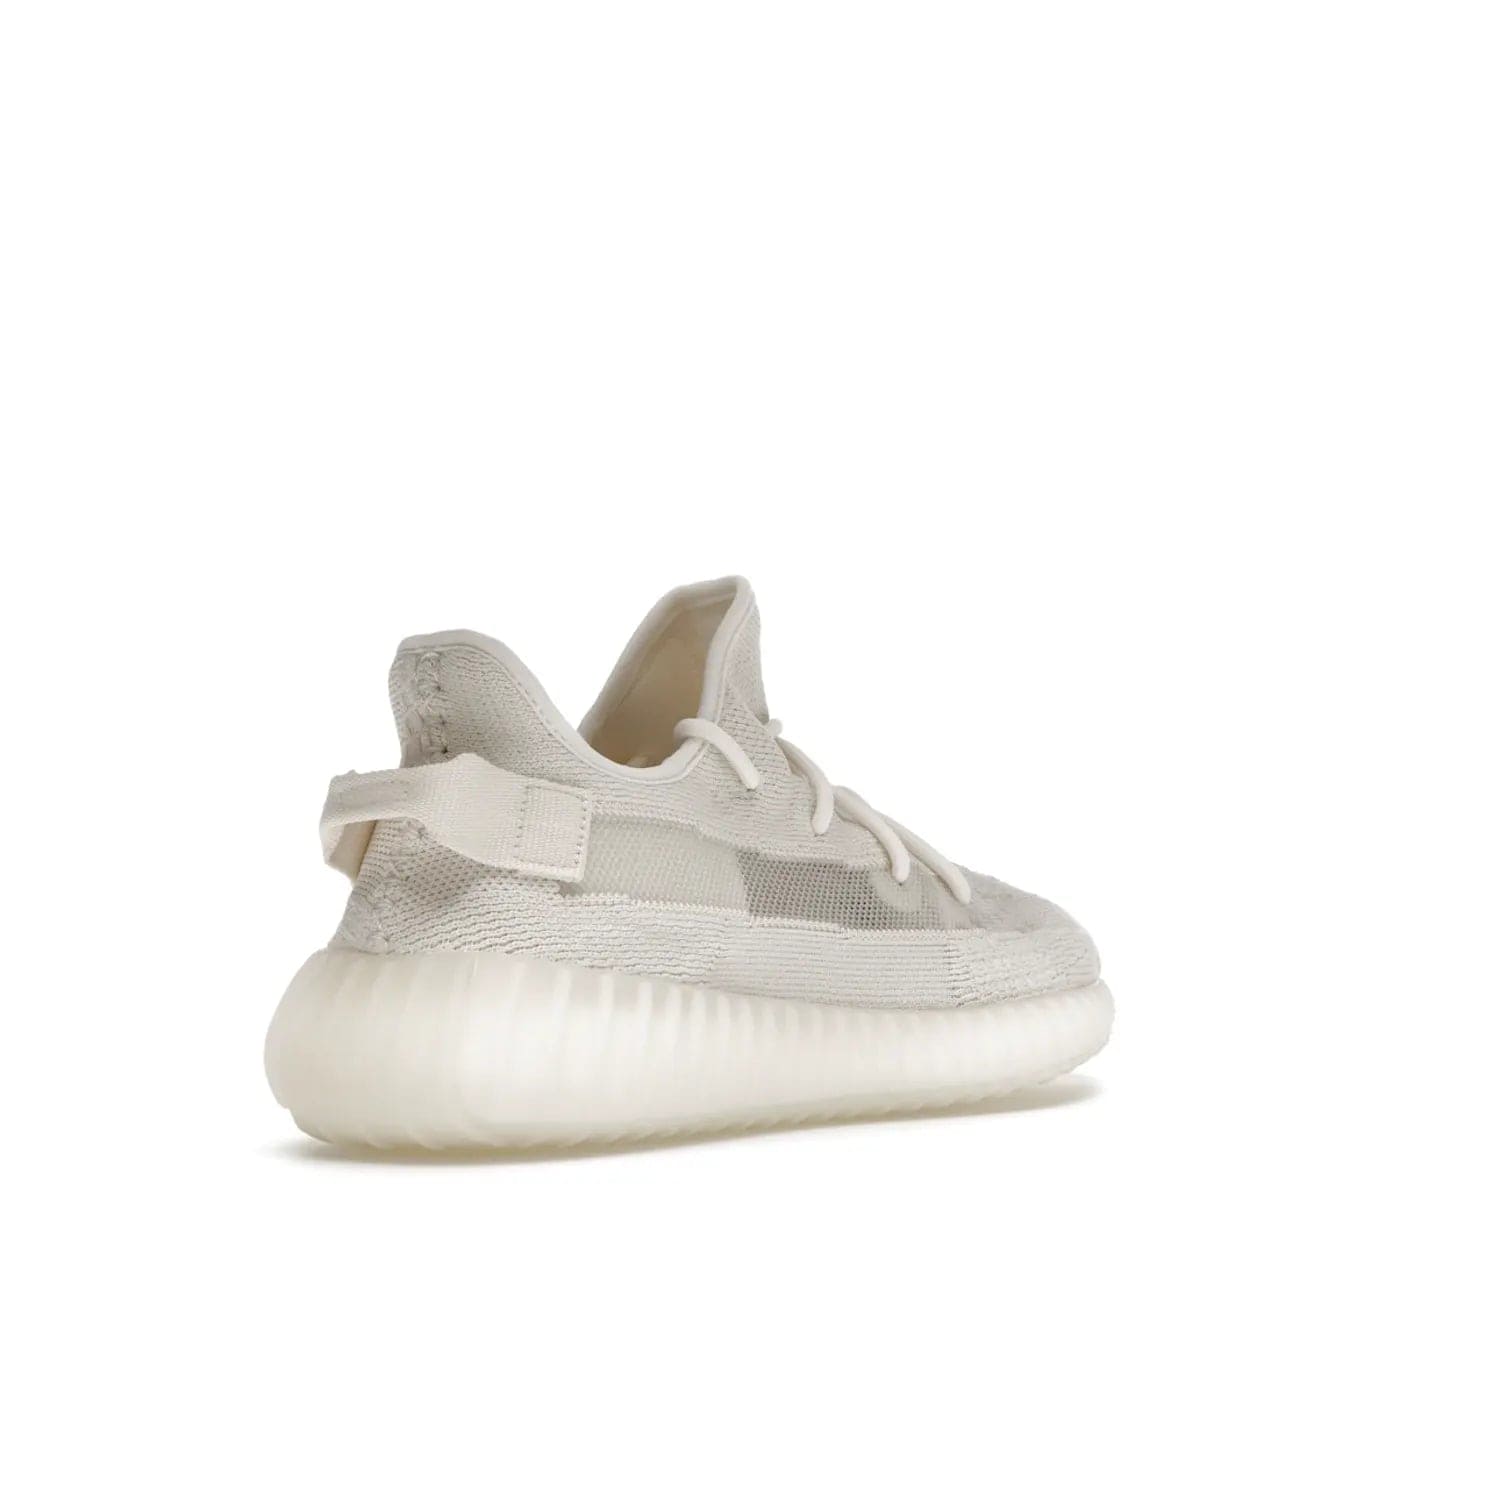 adidas Yeezy Boost 350 V2 Bone - Image 32 - Only at www.BallersClubKickz.com - Grab the stylish and comfortable adidas Yeezy Boost 350 V2 Bone in March 2022. This sneaker features a triple white Primeknit upper, mesh side stripes and canvas heel tabs, sitting atop a semi-translucent sole with Boost technology. Sure to keep your feet comfortable and stylish!